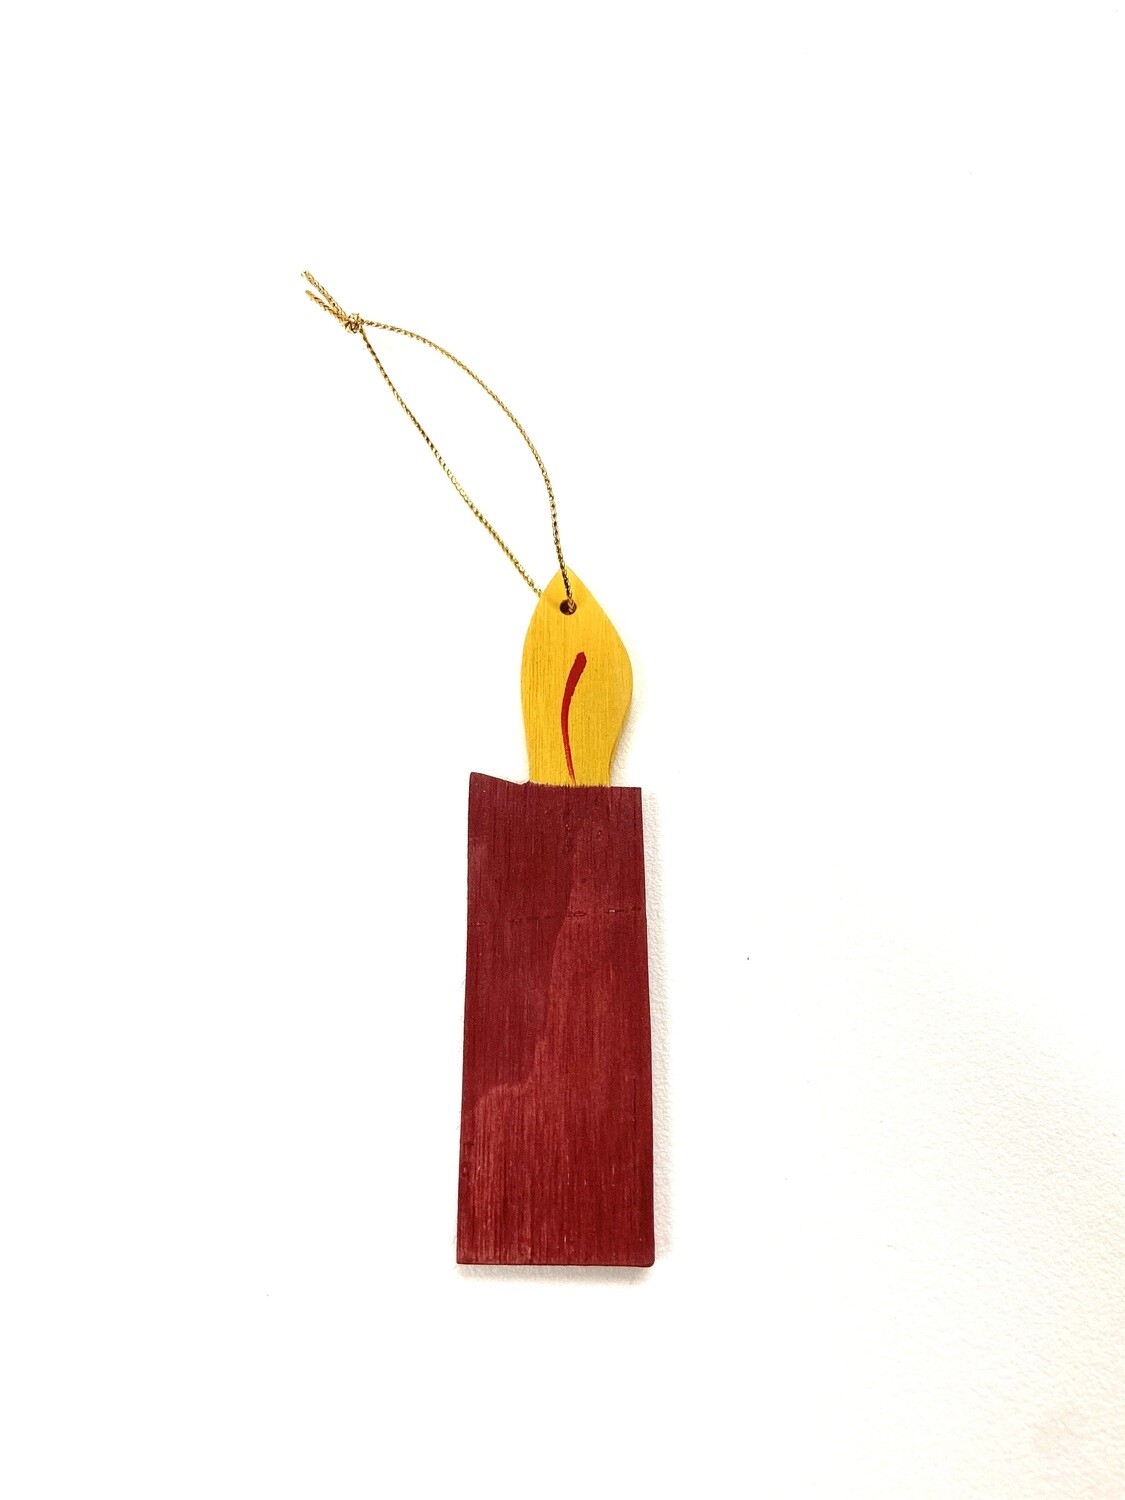 Candle Ornament- Jerry Walsh